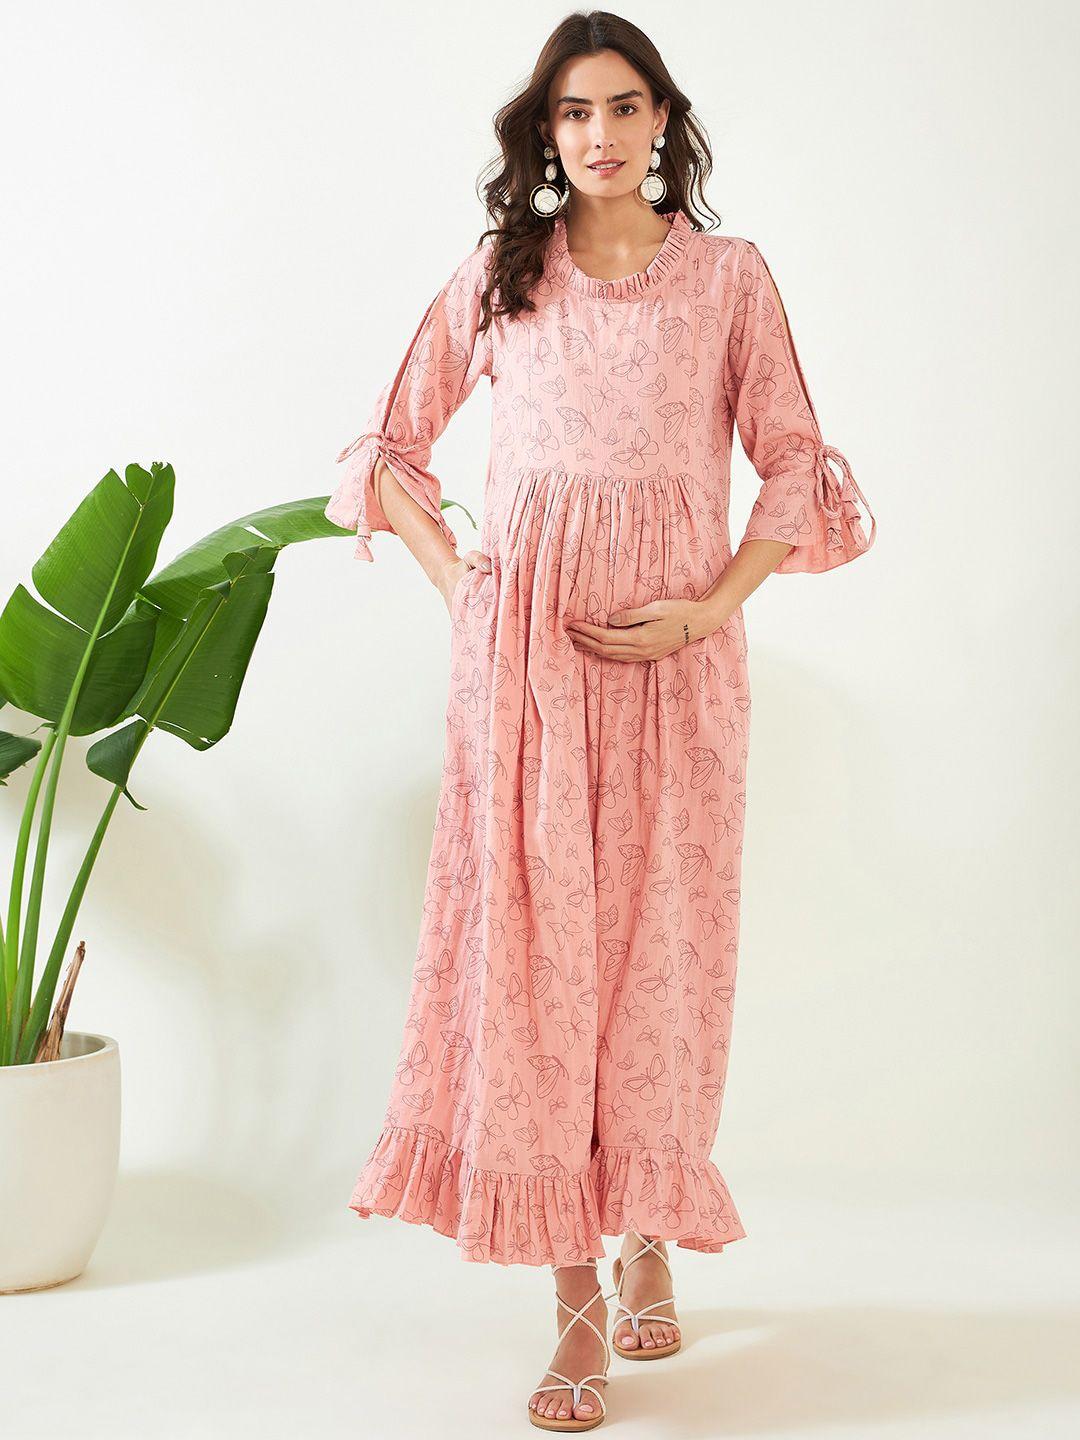 The Kaftan Company Graphic Printed Cotton Bell Sleeves Maternity Maxi Dress